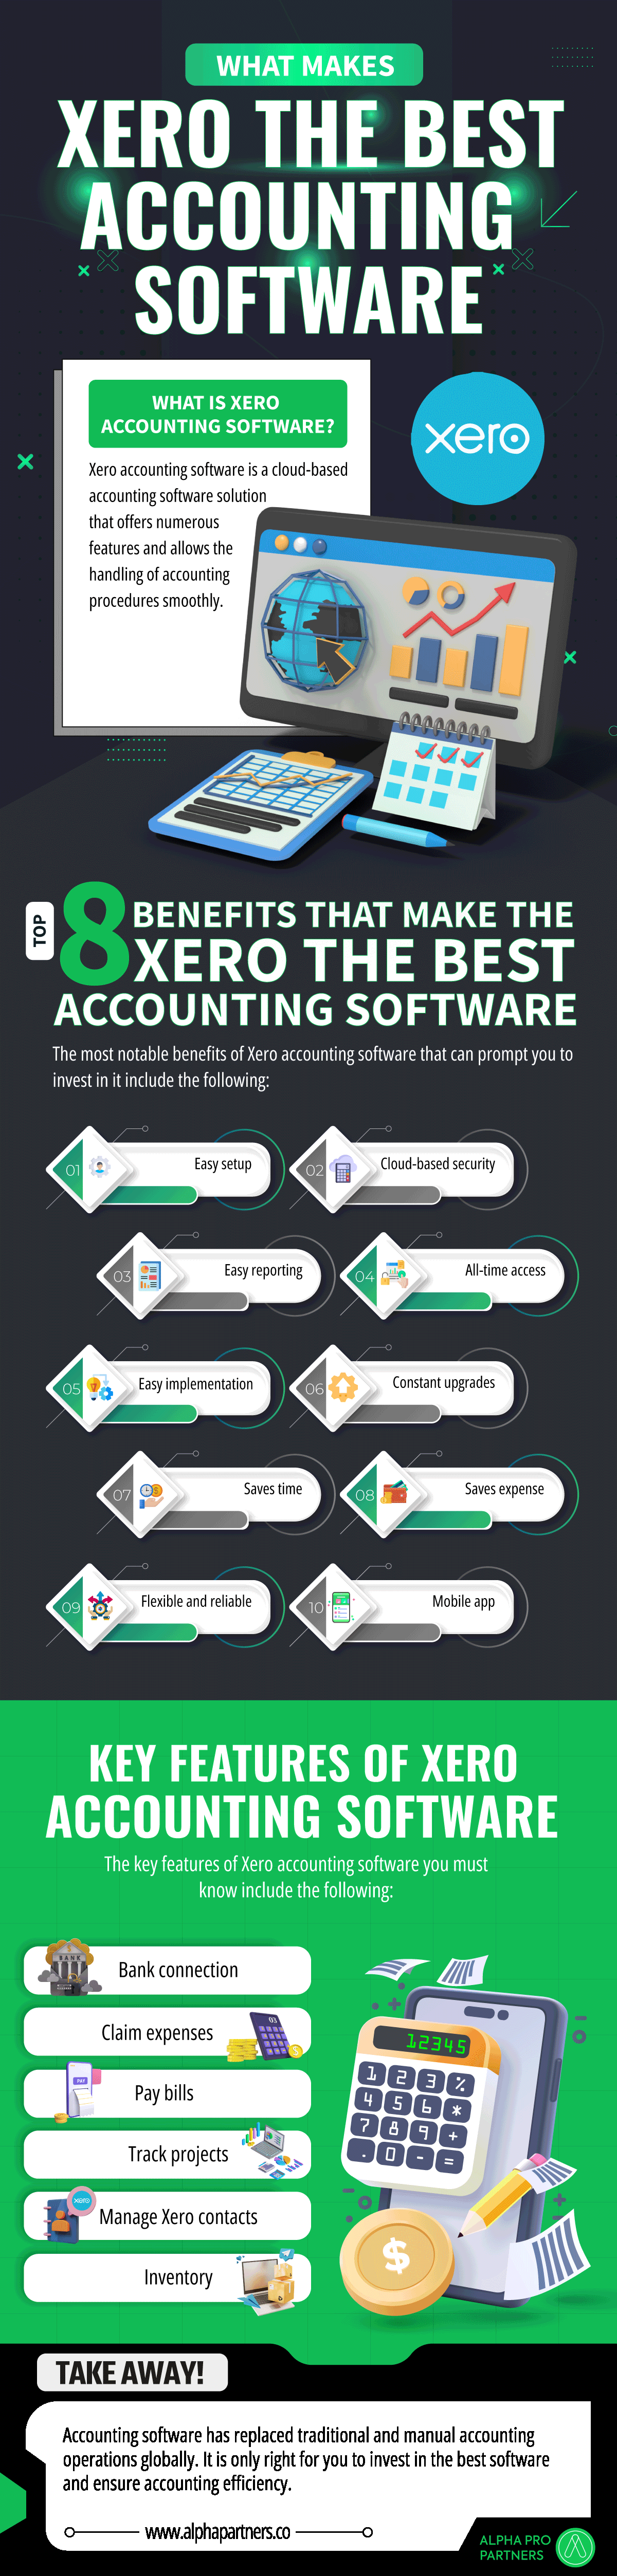 Xero is the Best Accounting Software